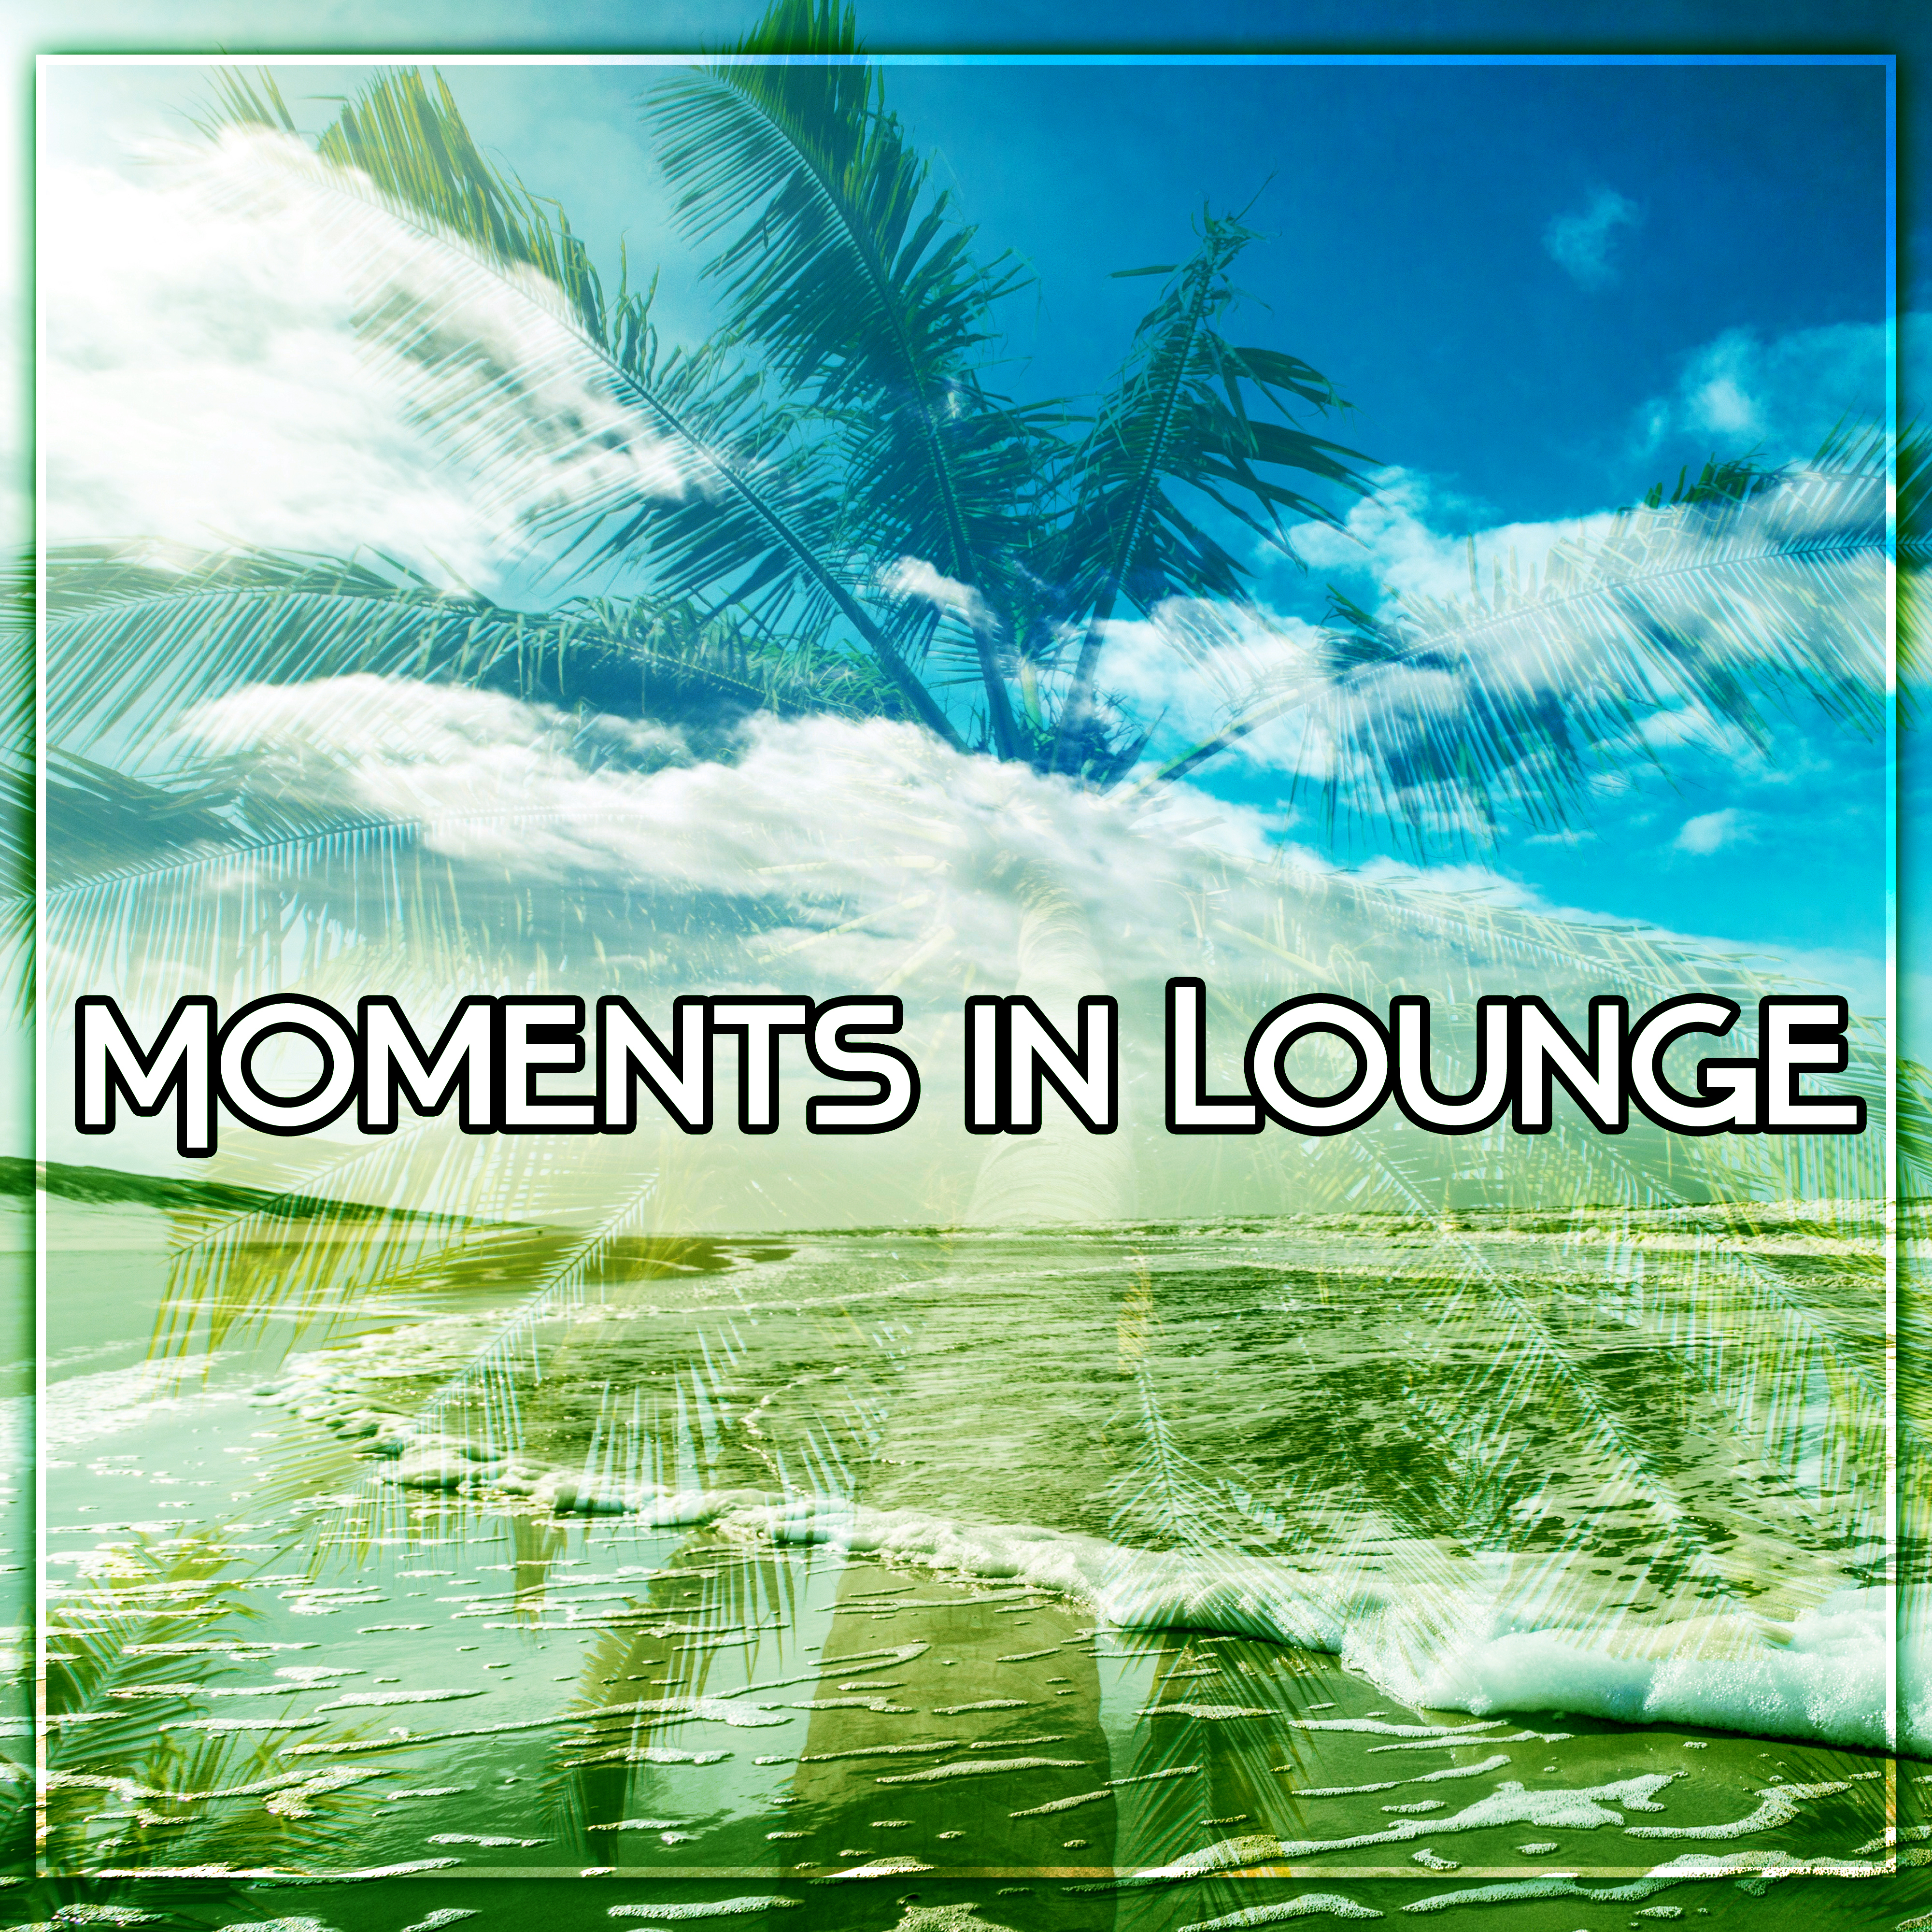 Moments in Lounge – Summer Time, Holiday on Ibiza, Chillout Island